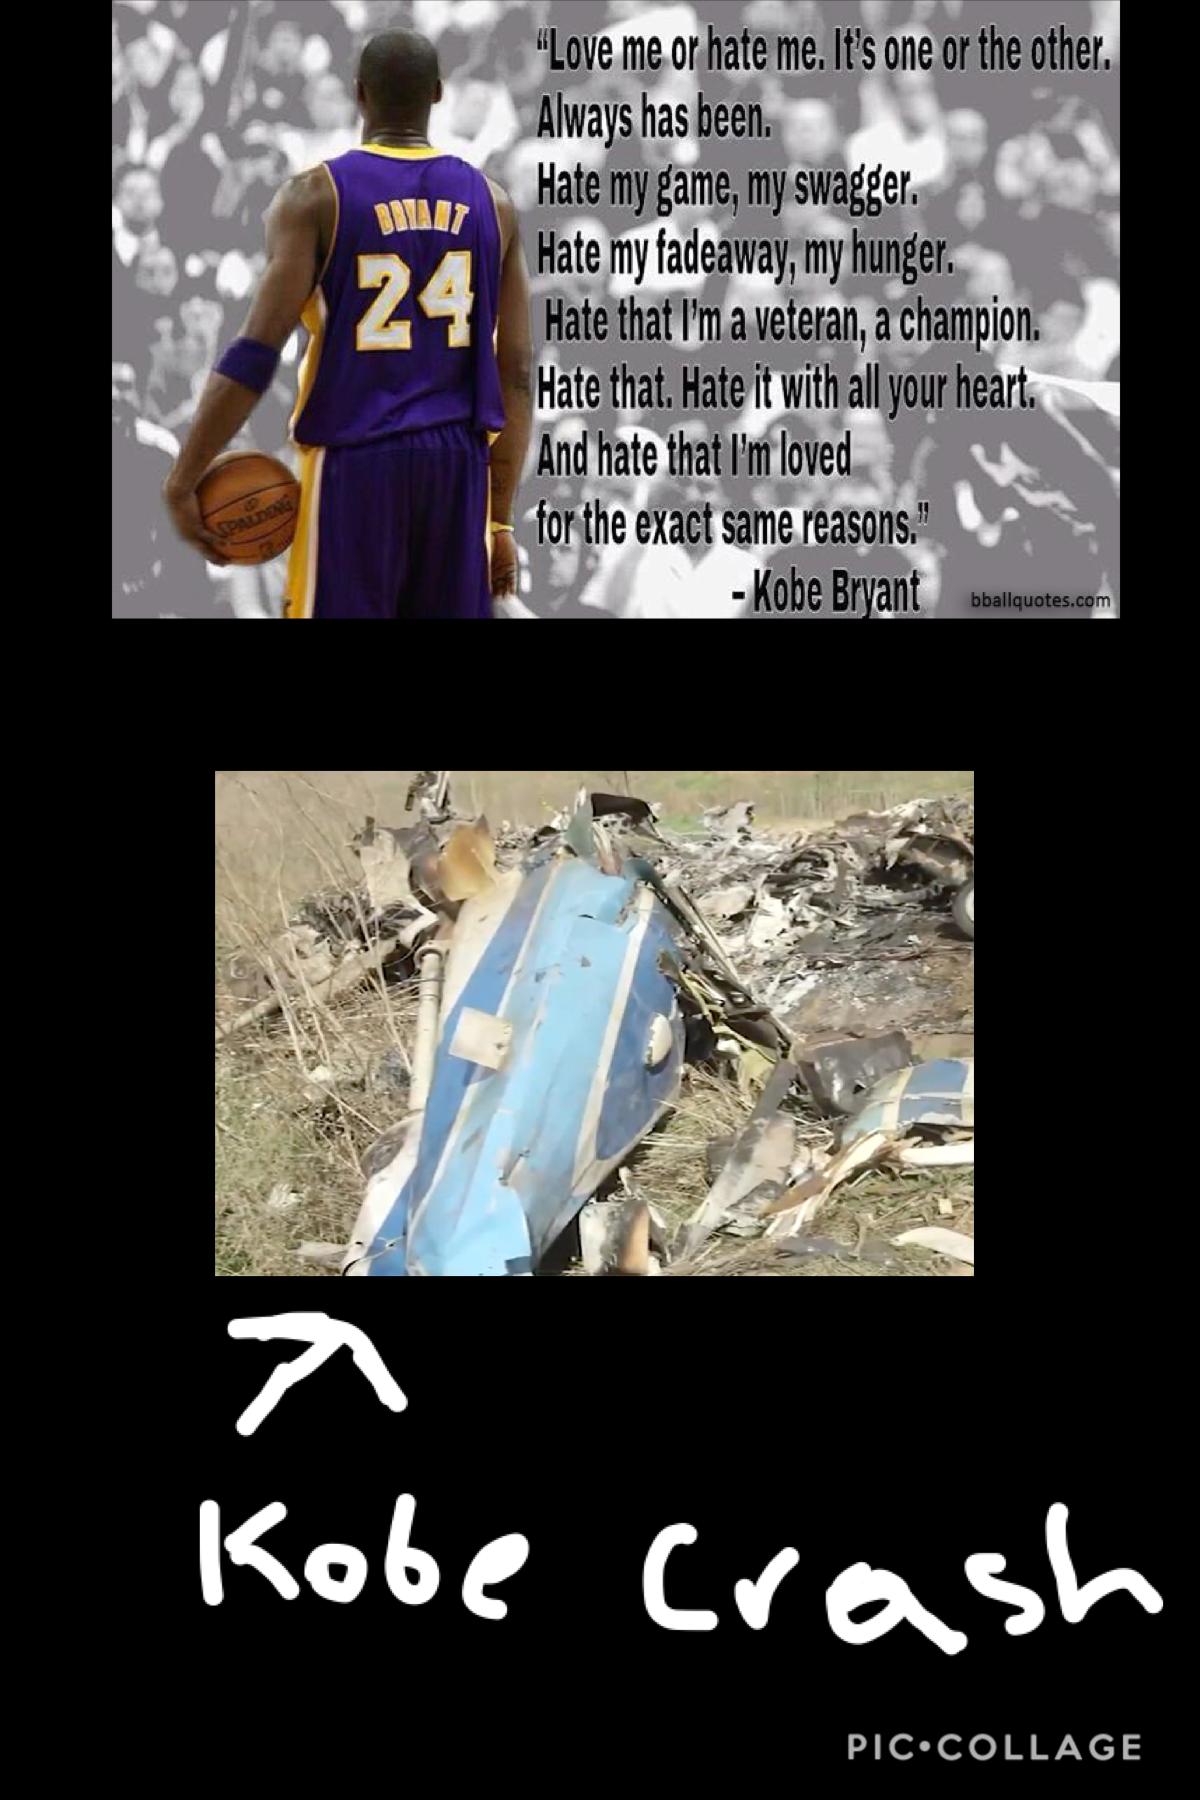 We will never forget you kobe